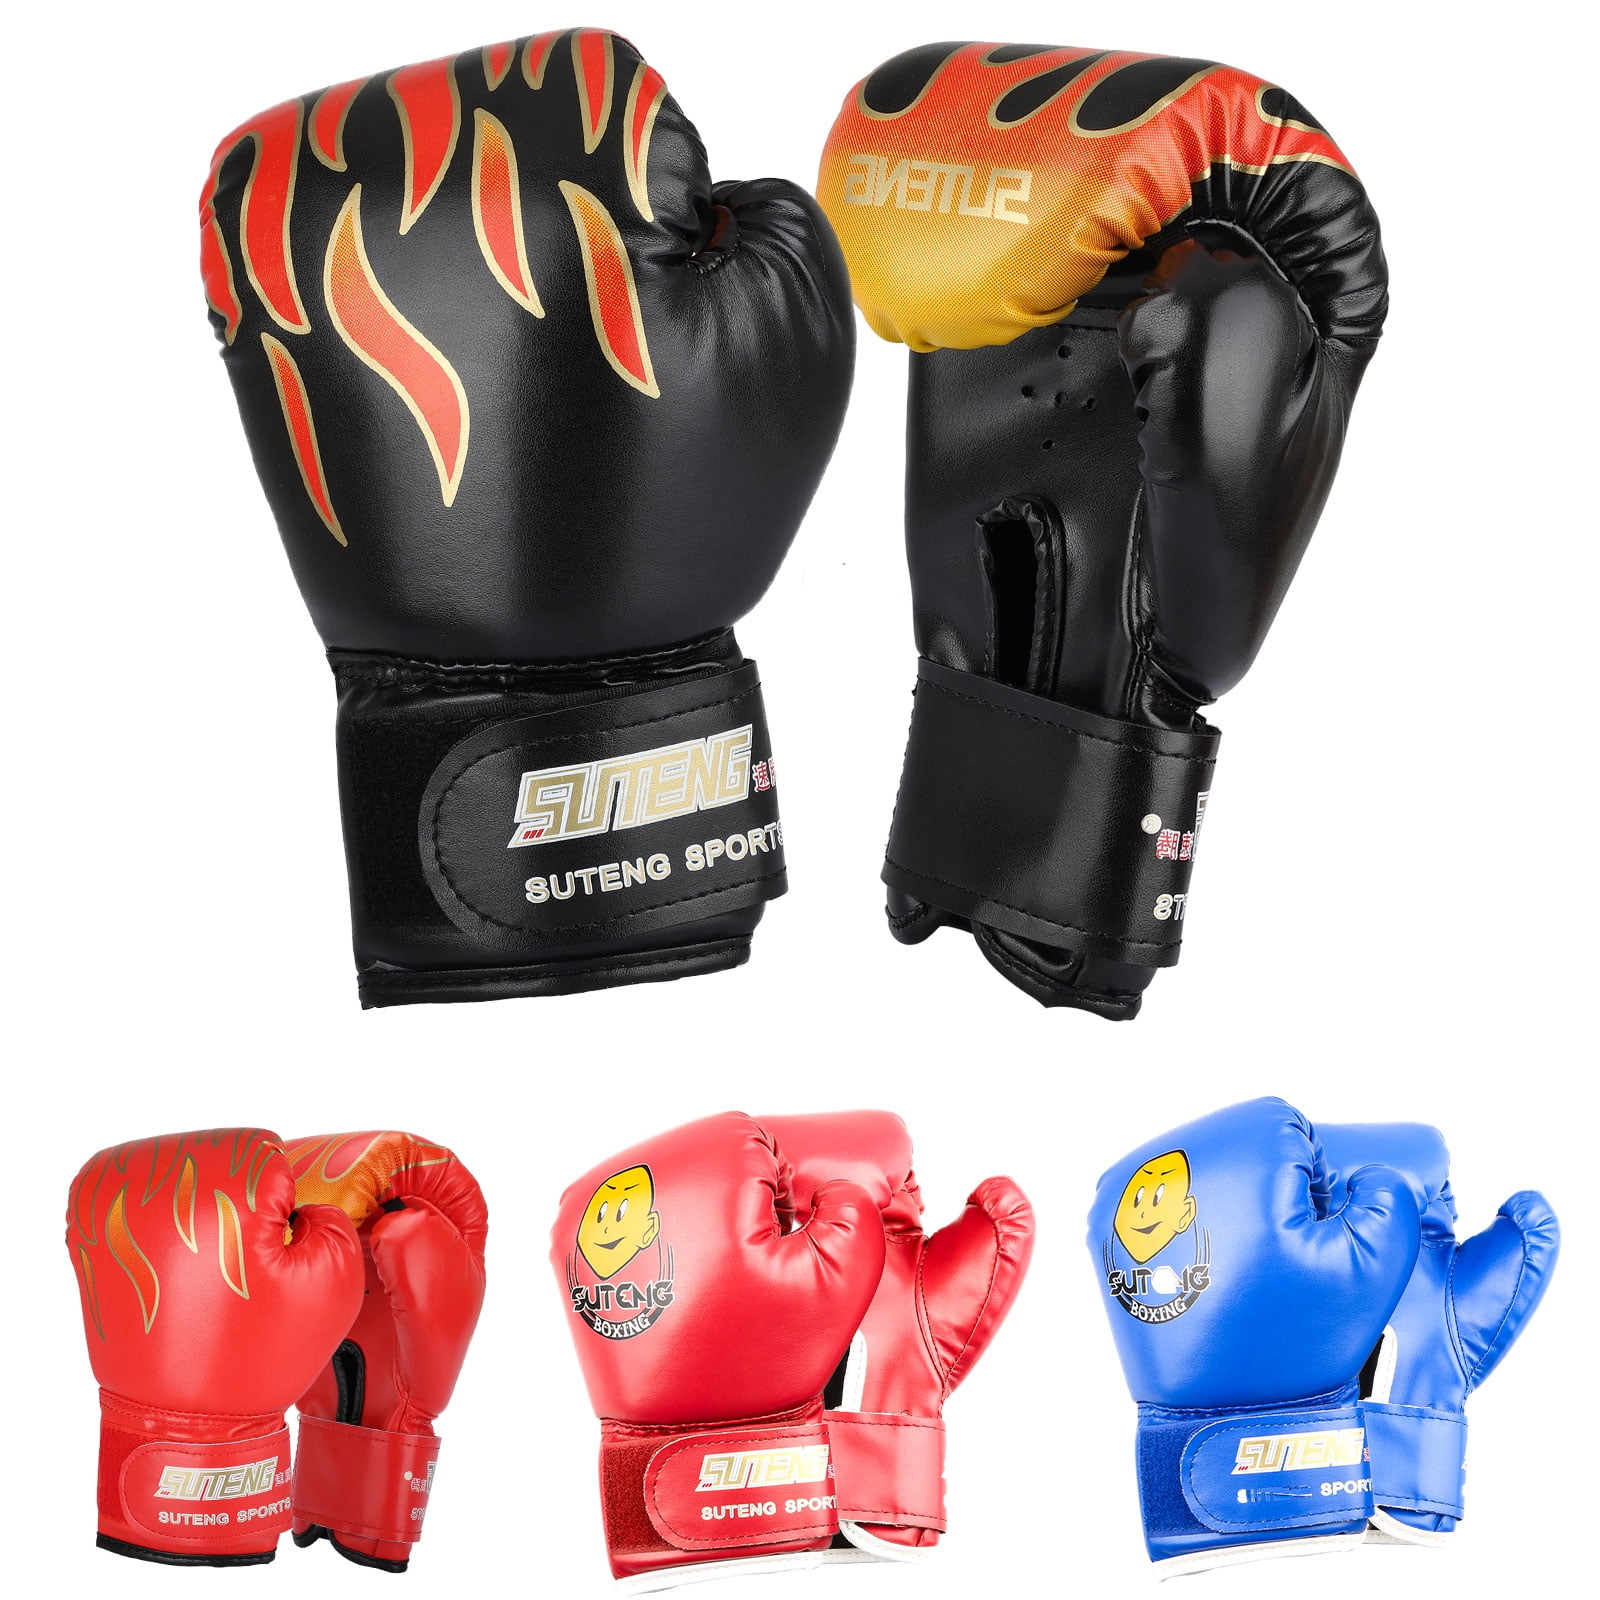 Boxing Gloves Muay Thai Training Punching Bag Sparring MMA UFC kickboxing Mitts 